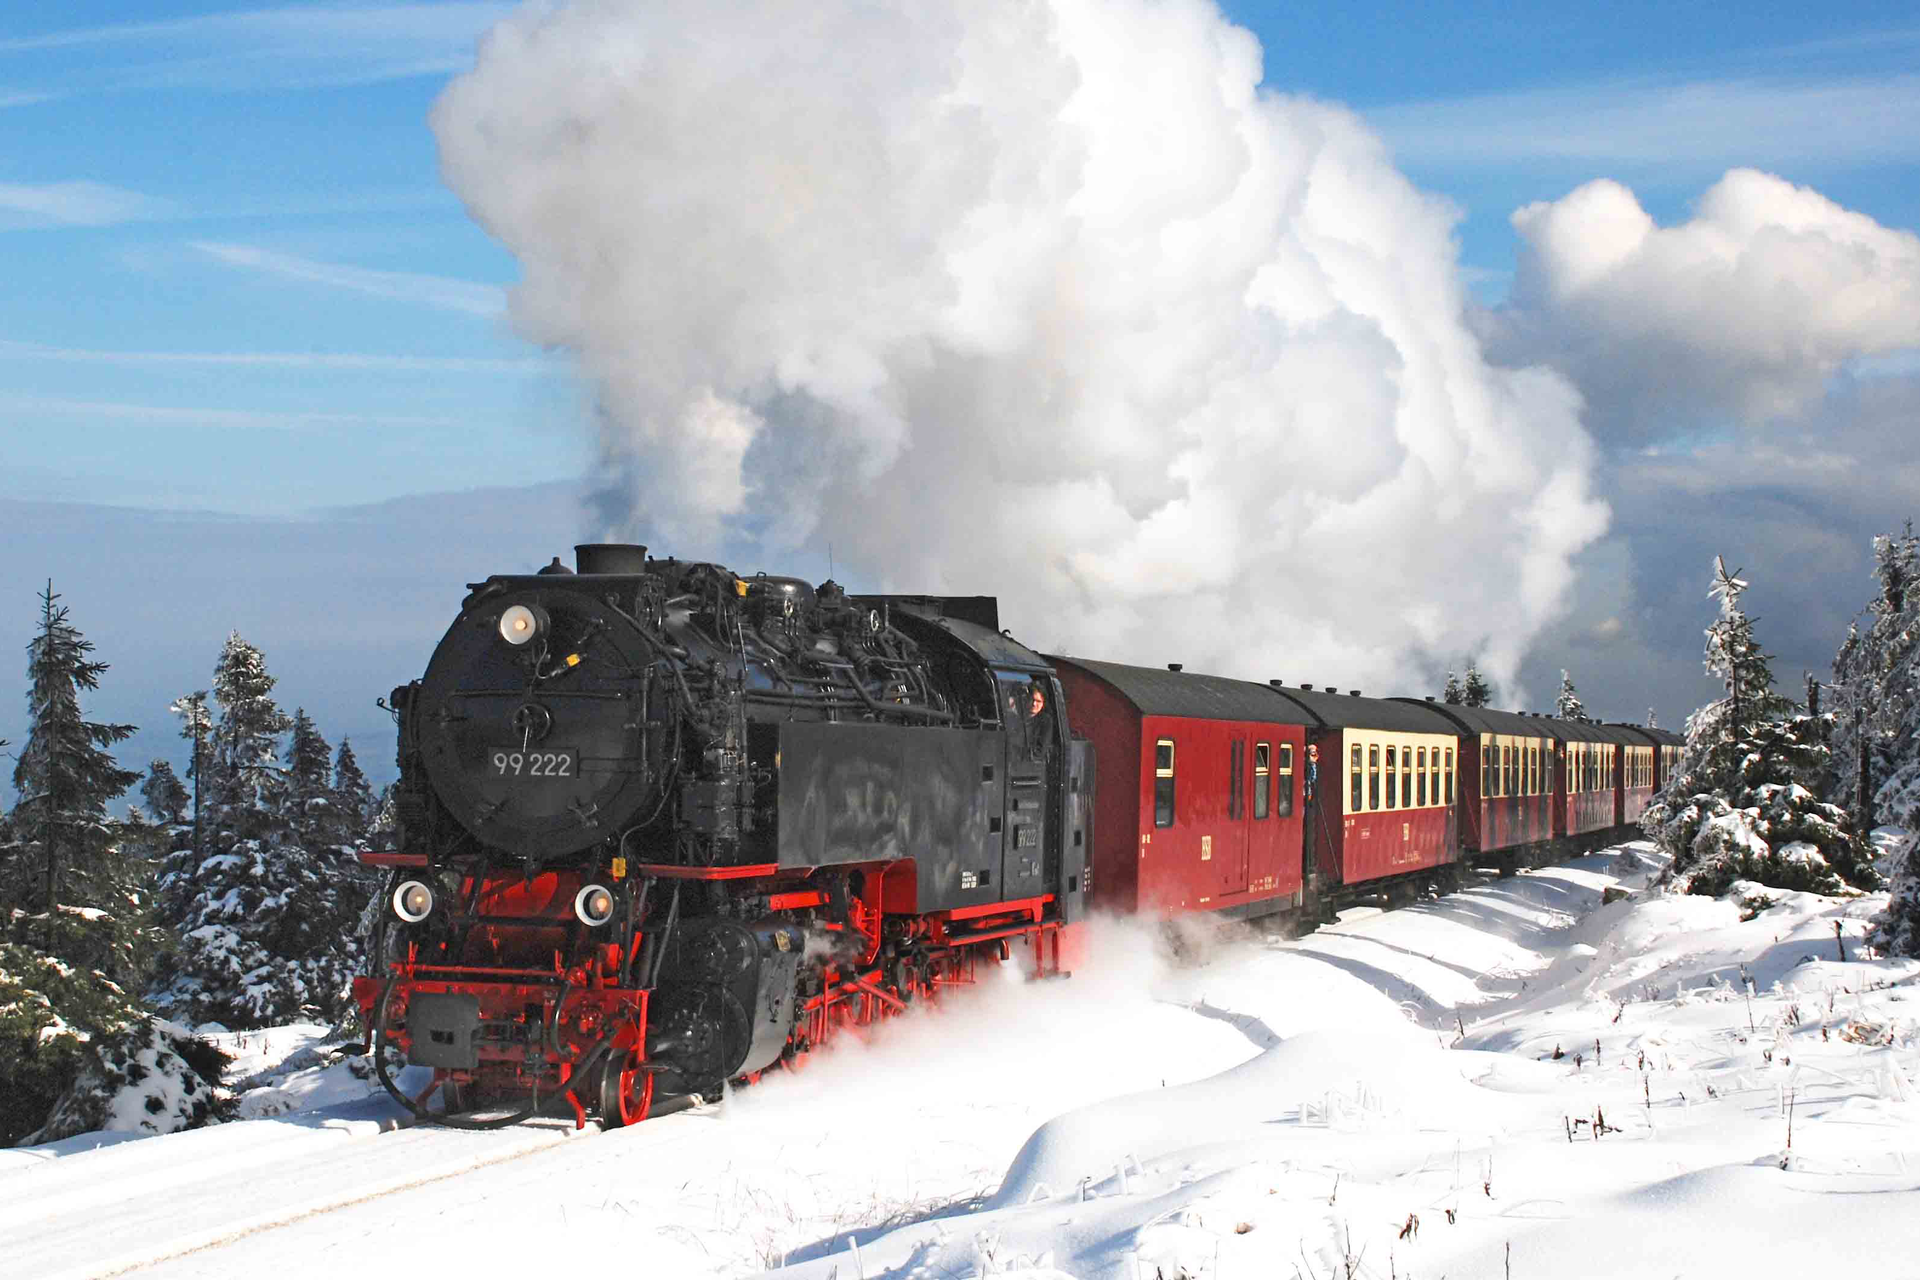 Steam and Christmas Markets in Germany